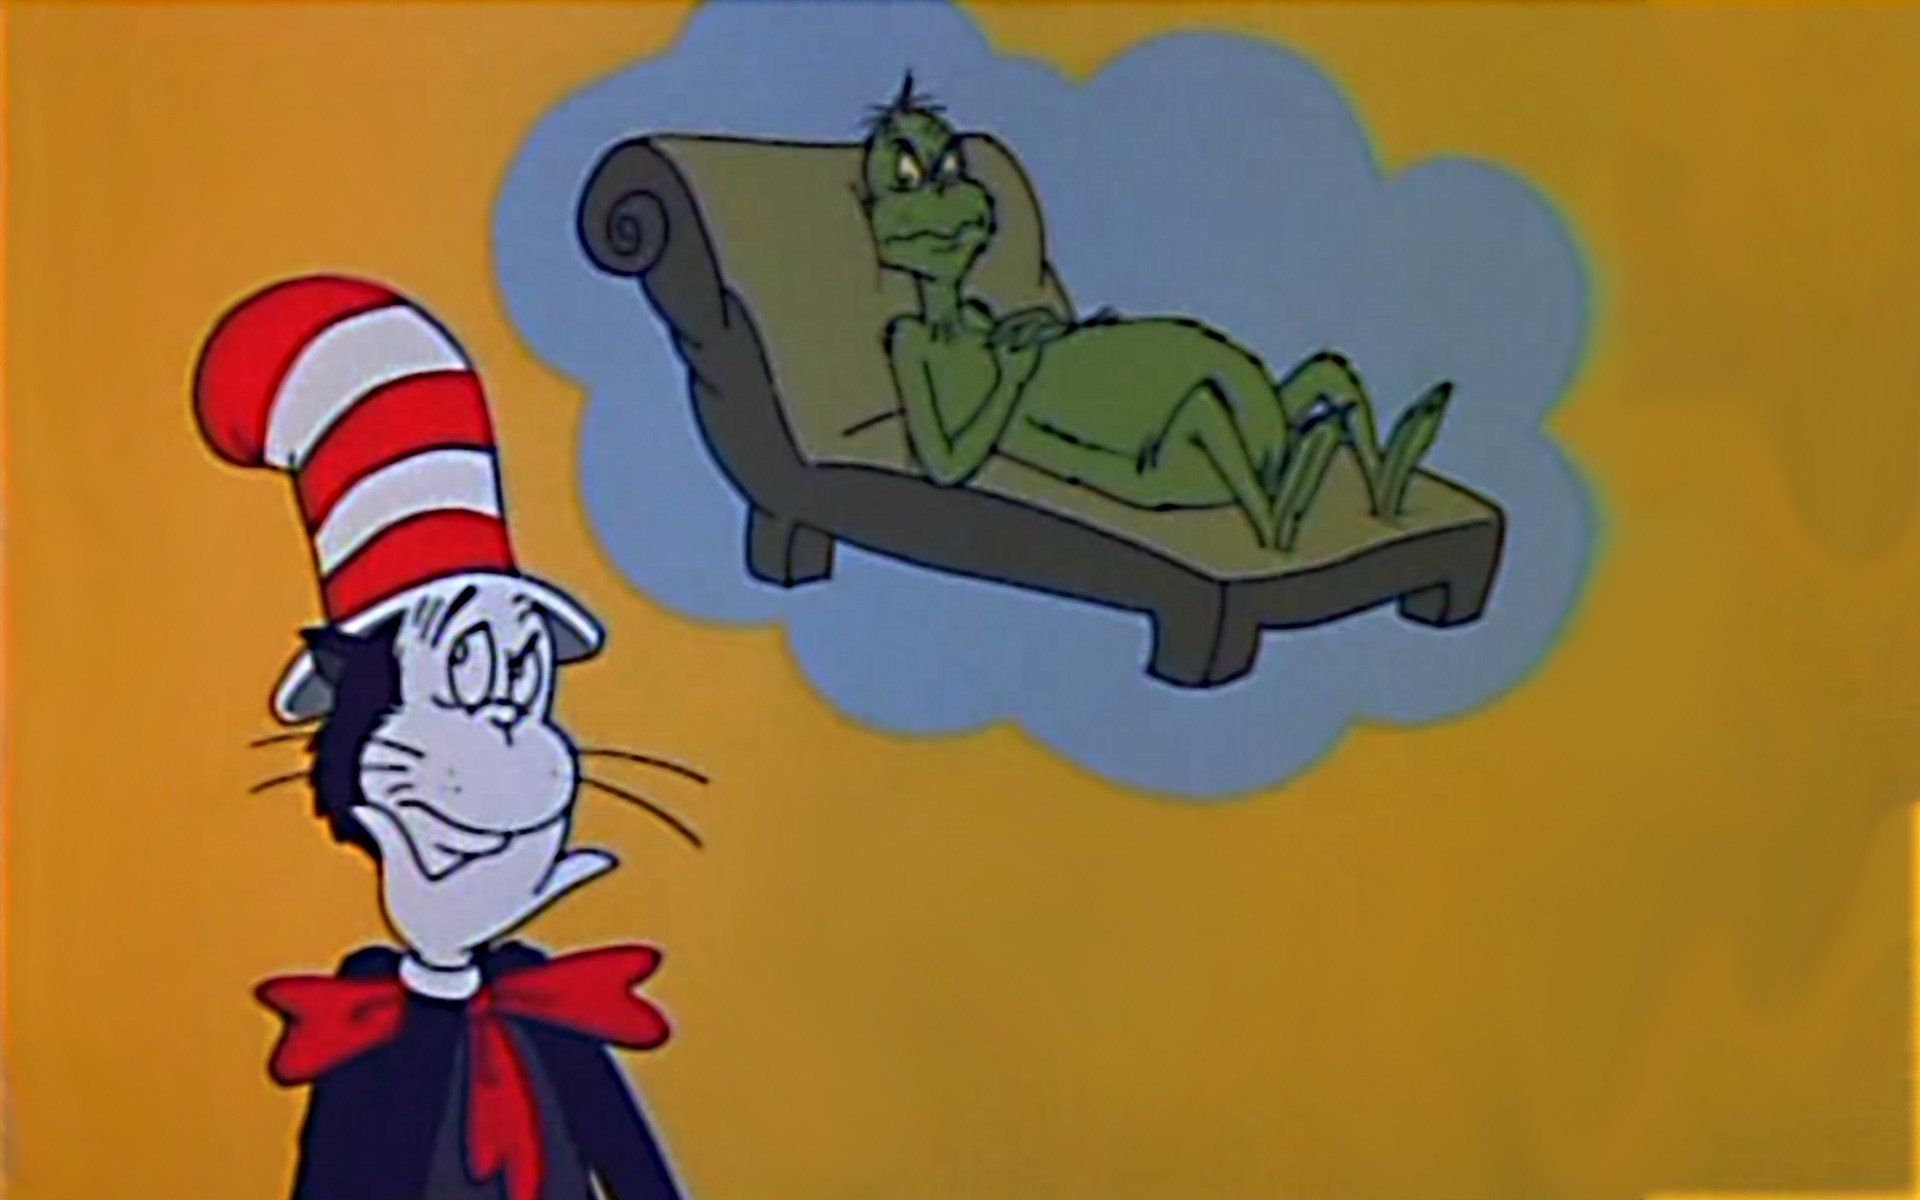 The Grinch Grinches The Cat In The Hat 1982 Where To Watch It